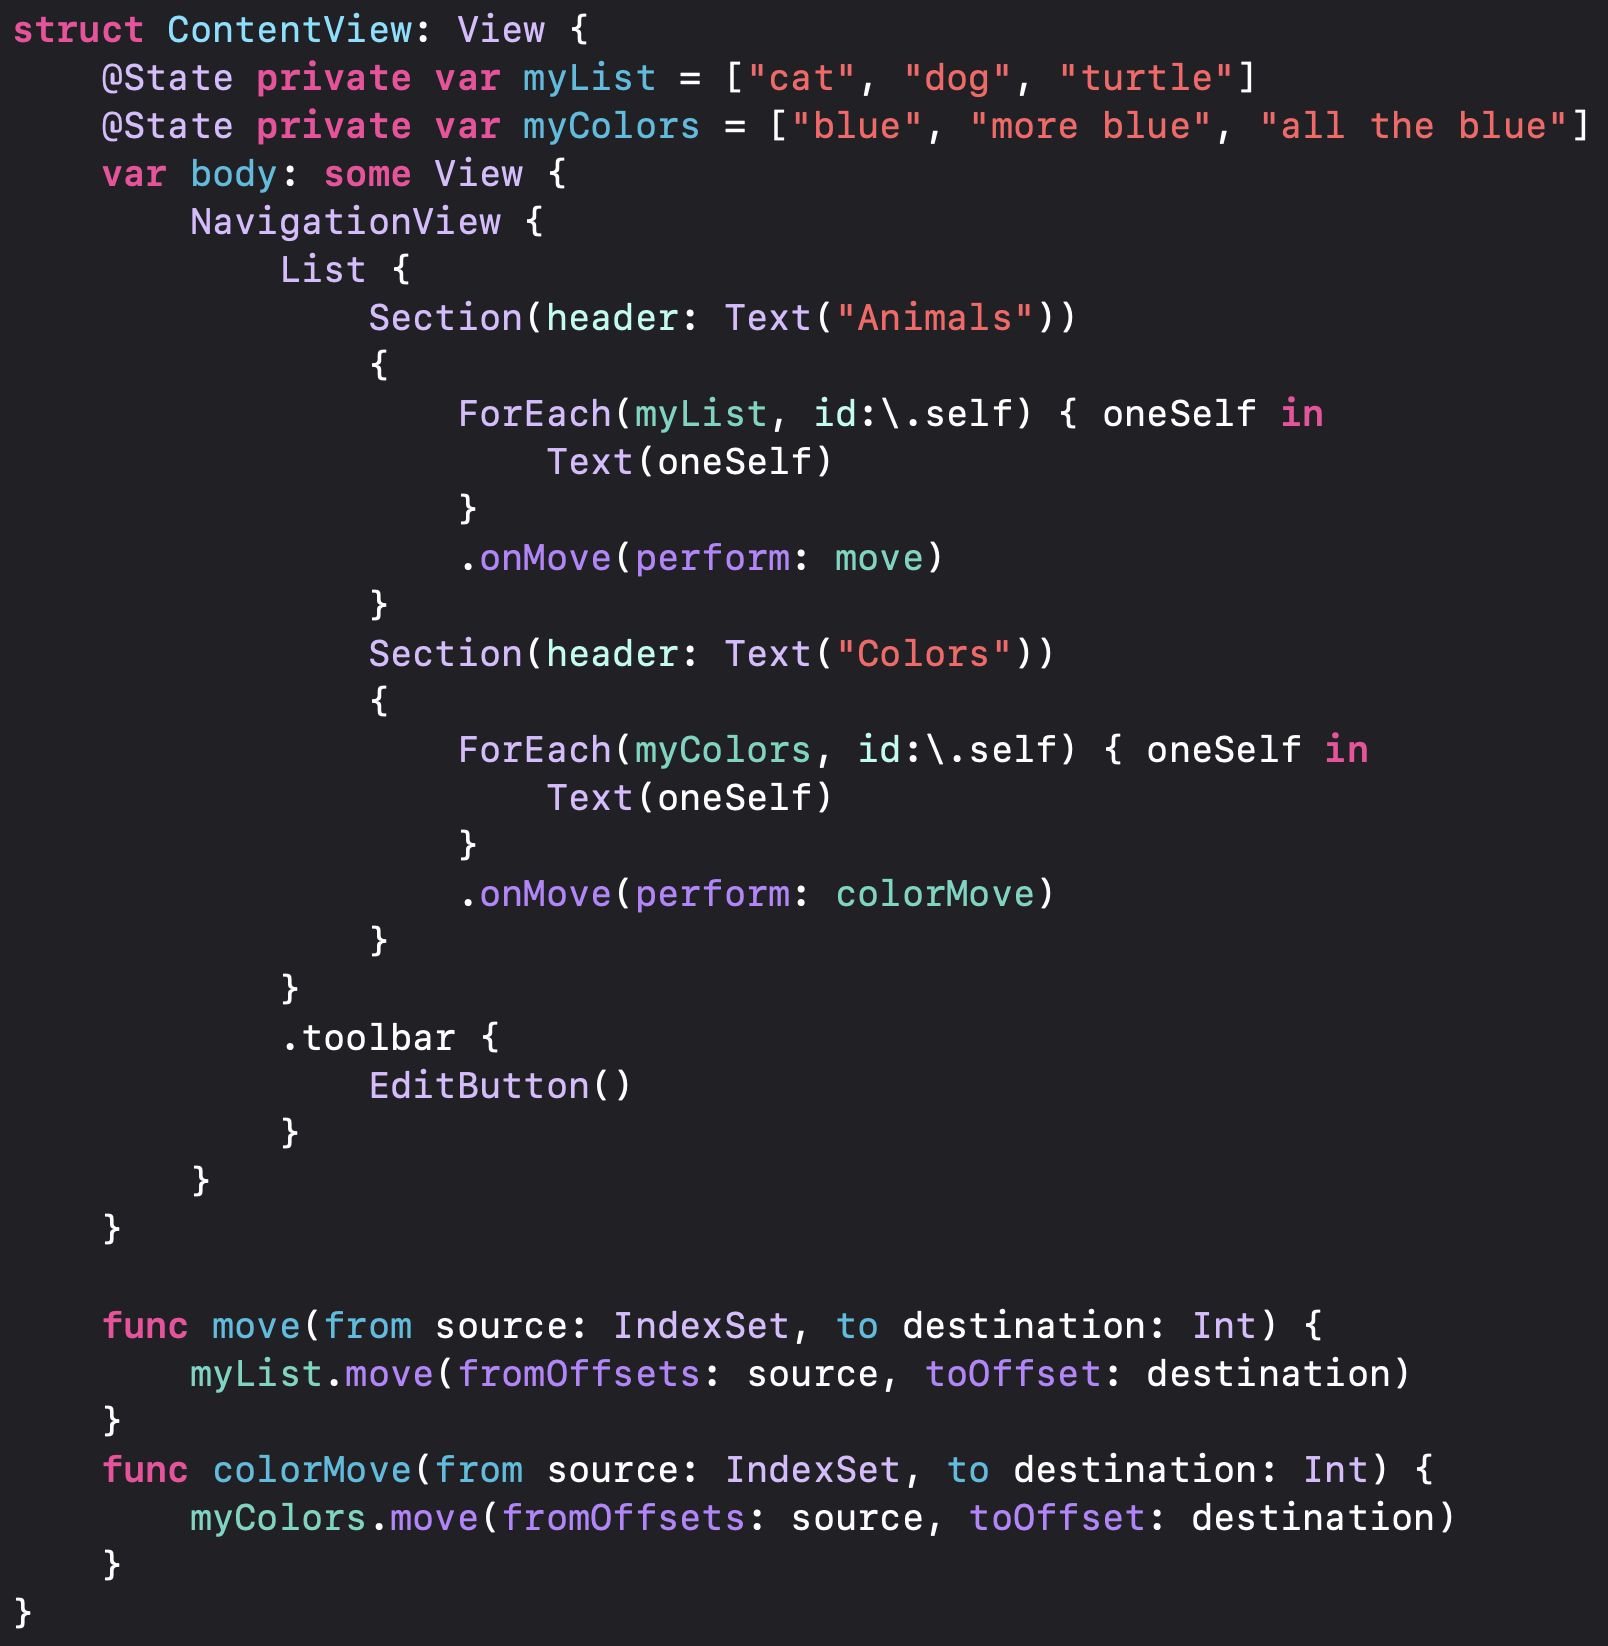 SwiftUI code for moving items in two simple Lists.